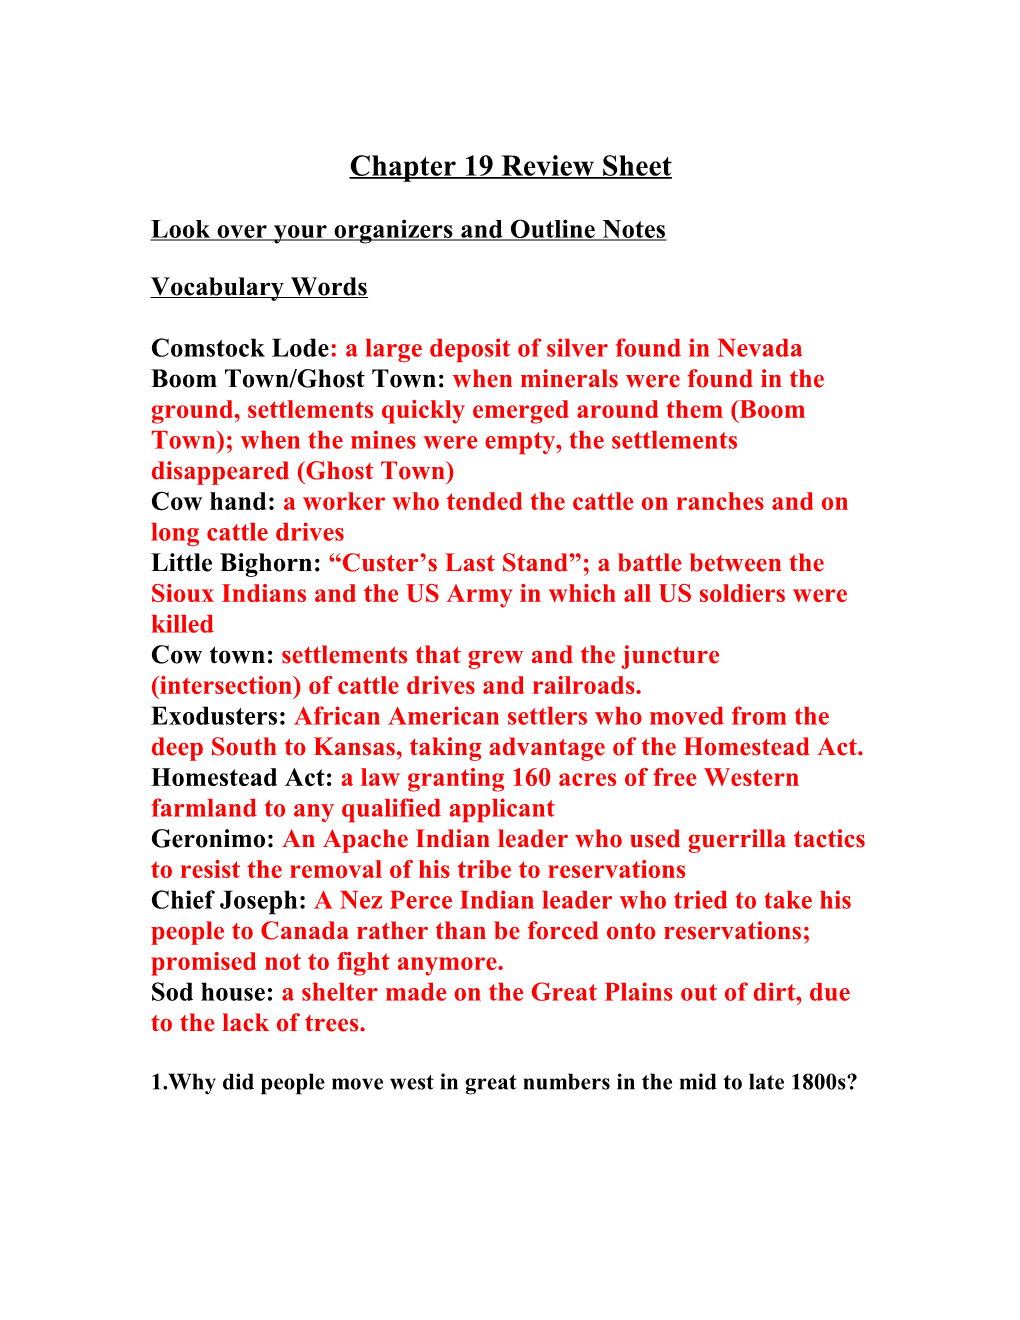 Chapter 10 Review Sheet